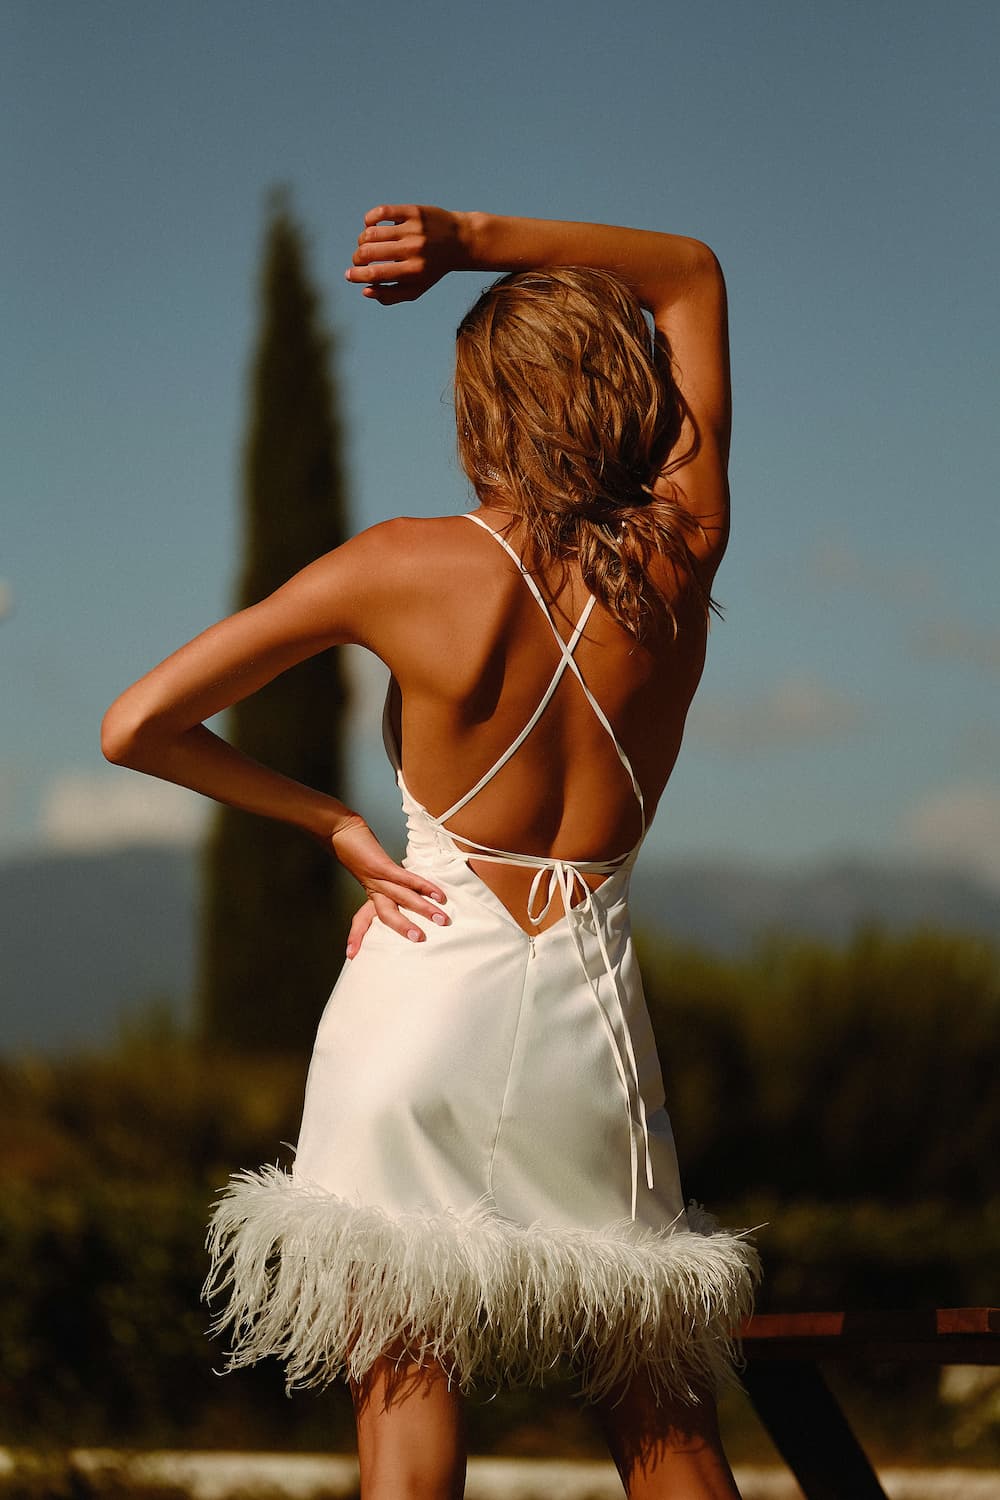 short wedding dress Gavana with satin, lace and feathers by dell'amore bridal, auckland, nz 2